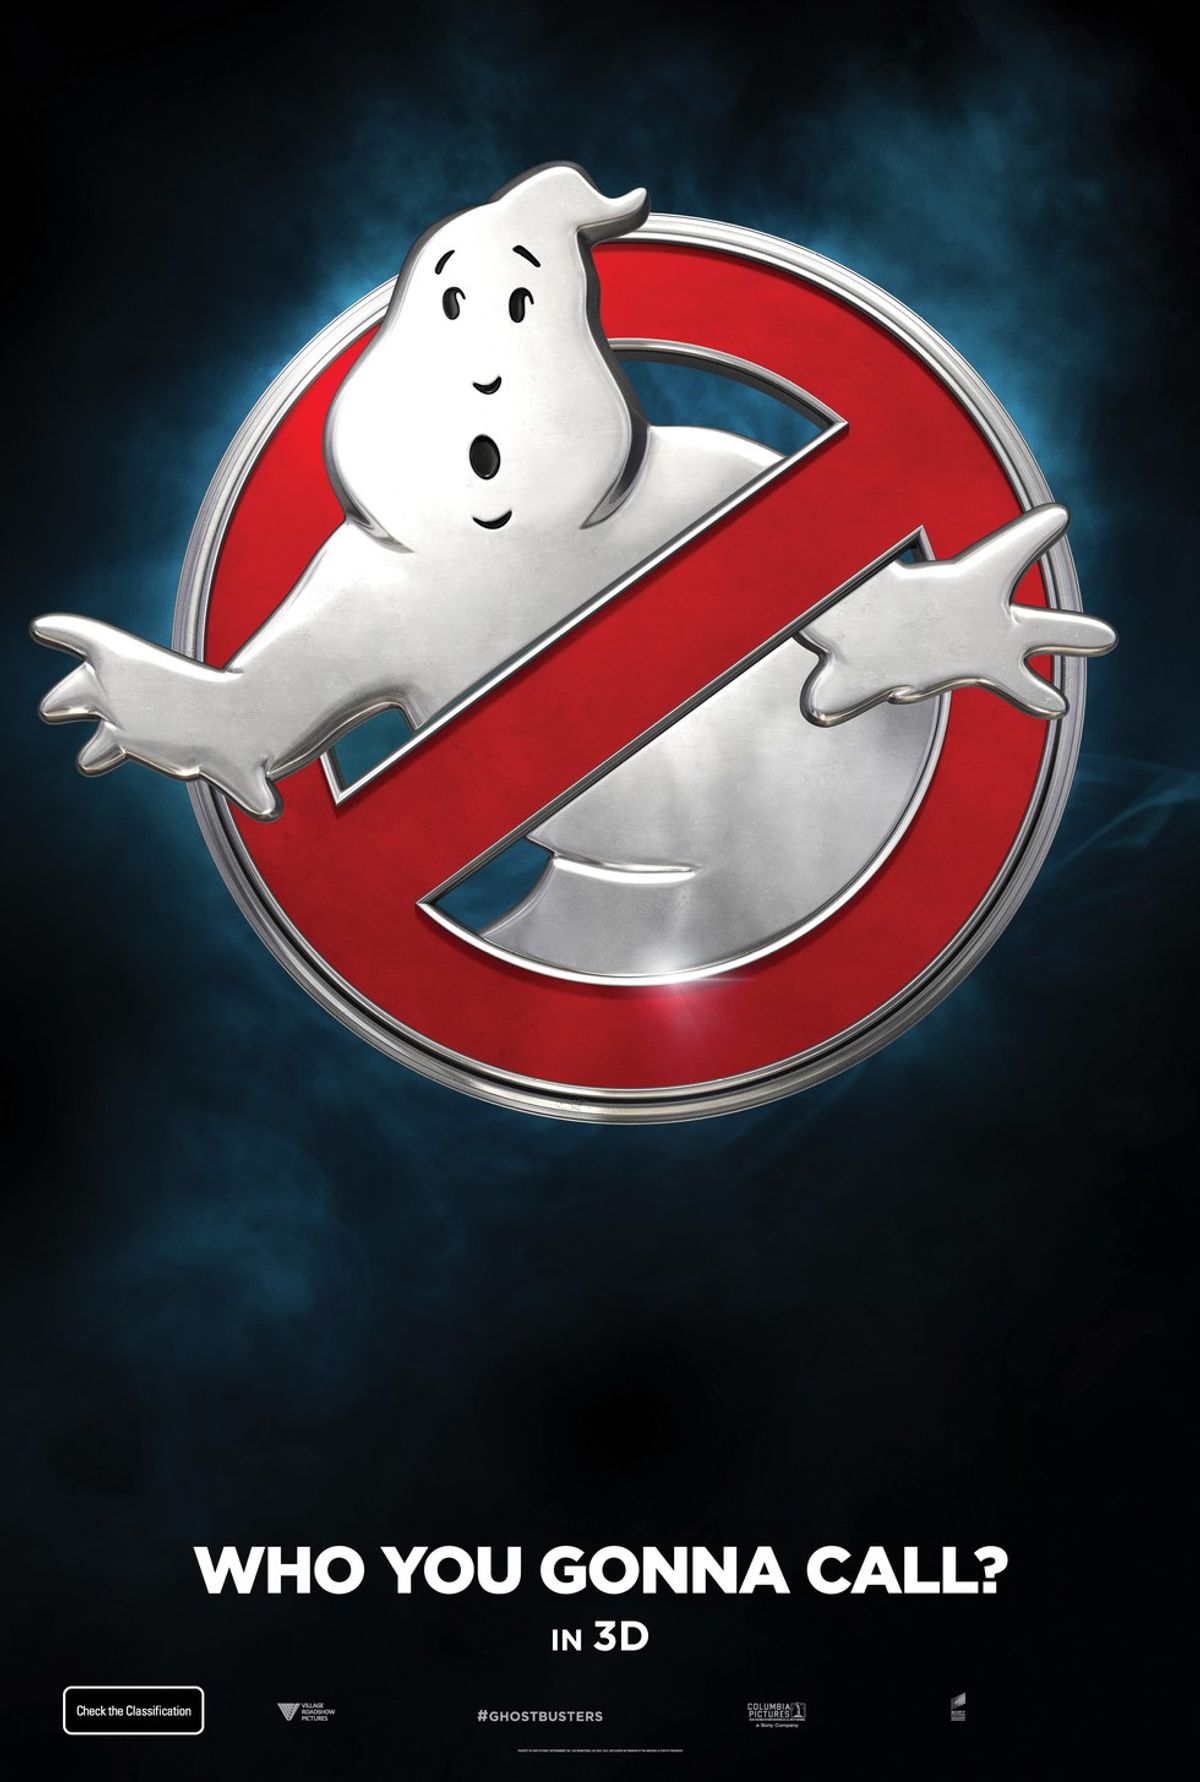 A Short Glance Into The Controversial 'GhostBusters'